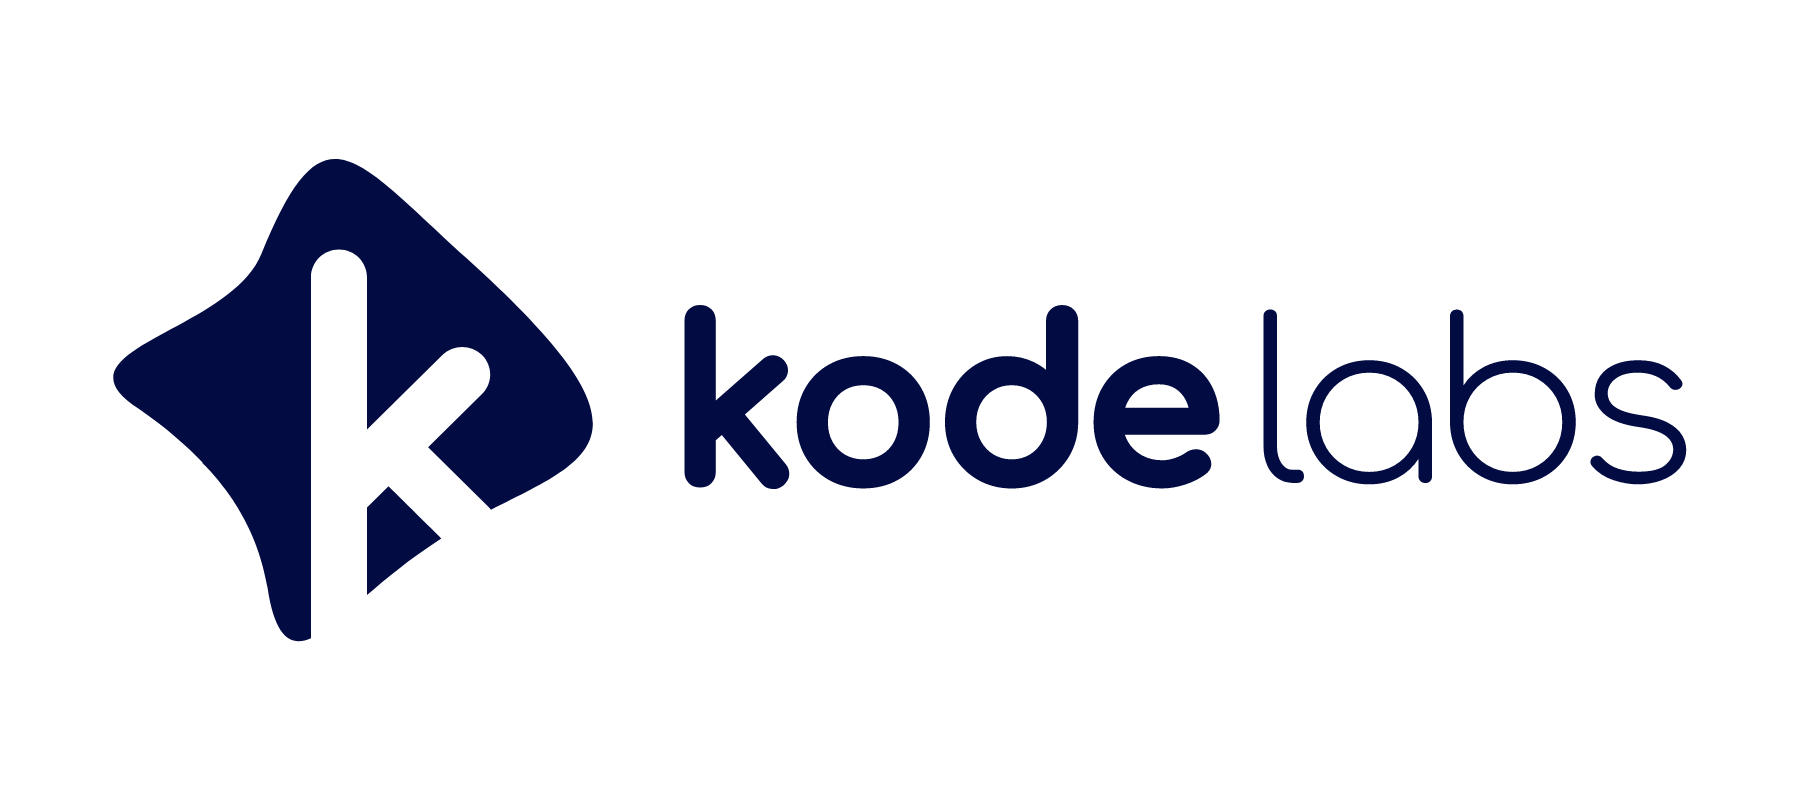 Detroit-based startup KODE Labs secures $30m Series B funding to propel global net-zero building emissions